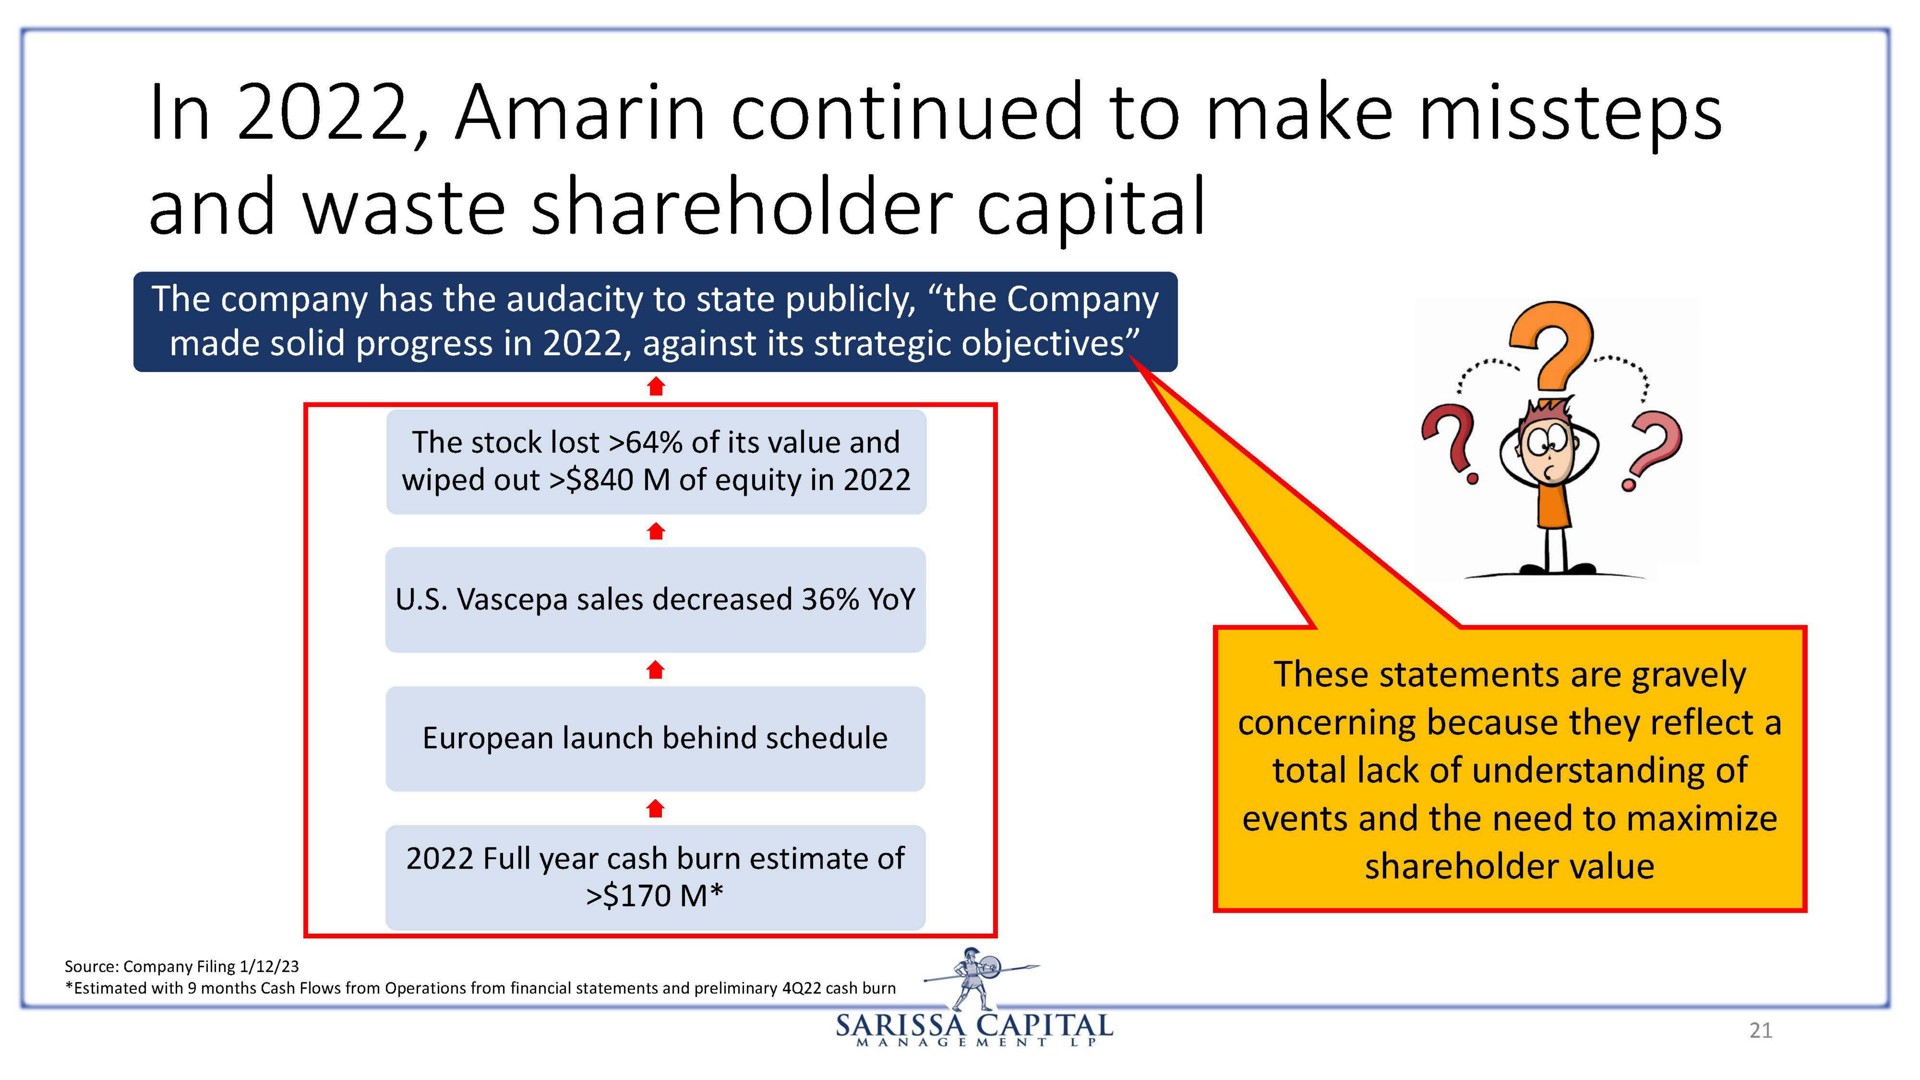 in amarin continued to make missteps and waste shareholder capital | Sarissa Capital